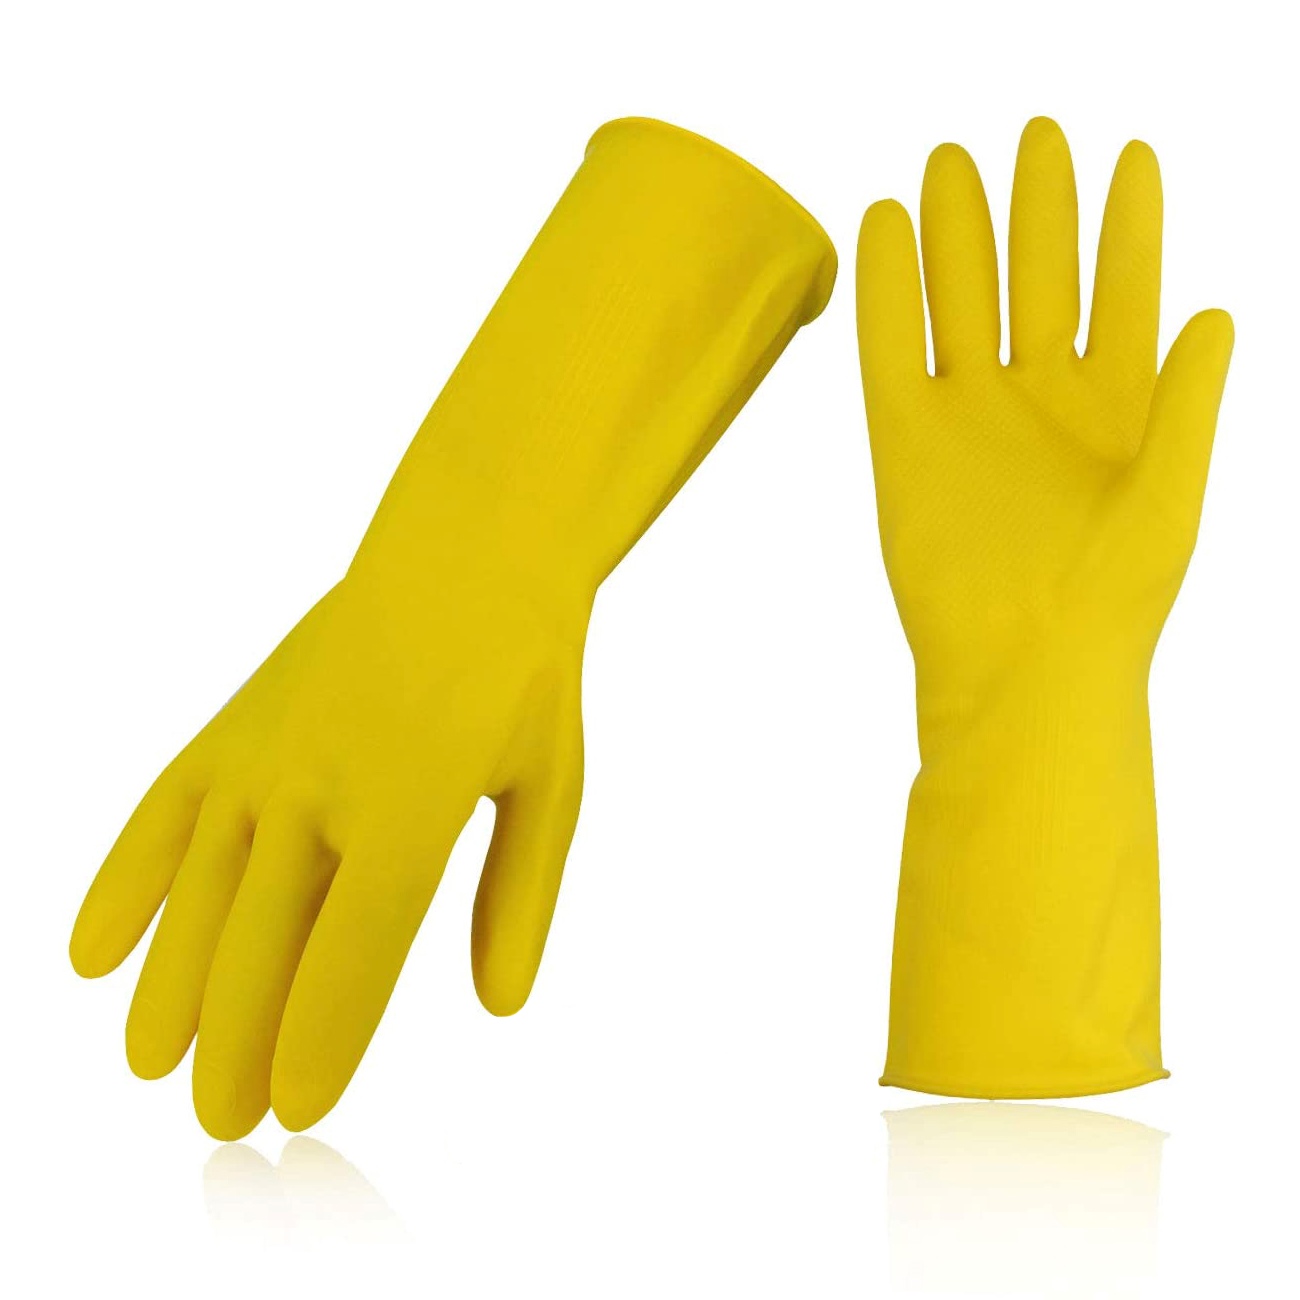 How To Store Kitchen Gloves